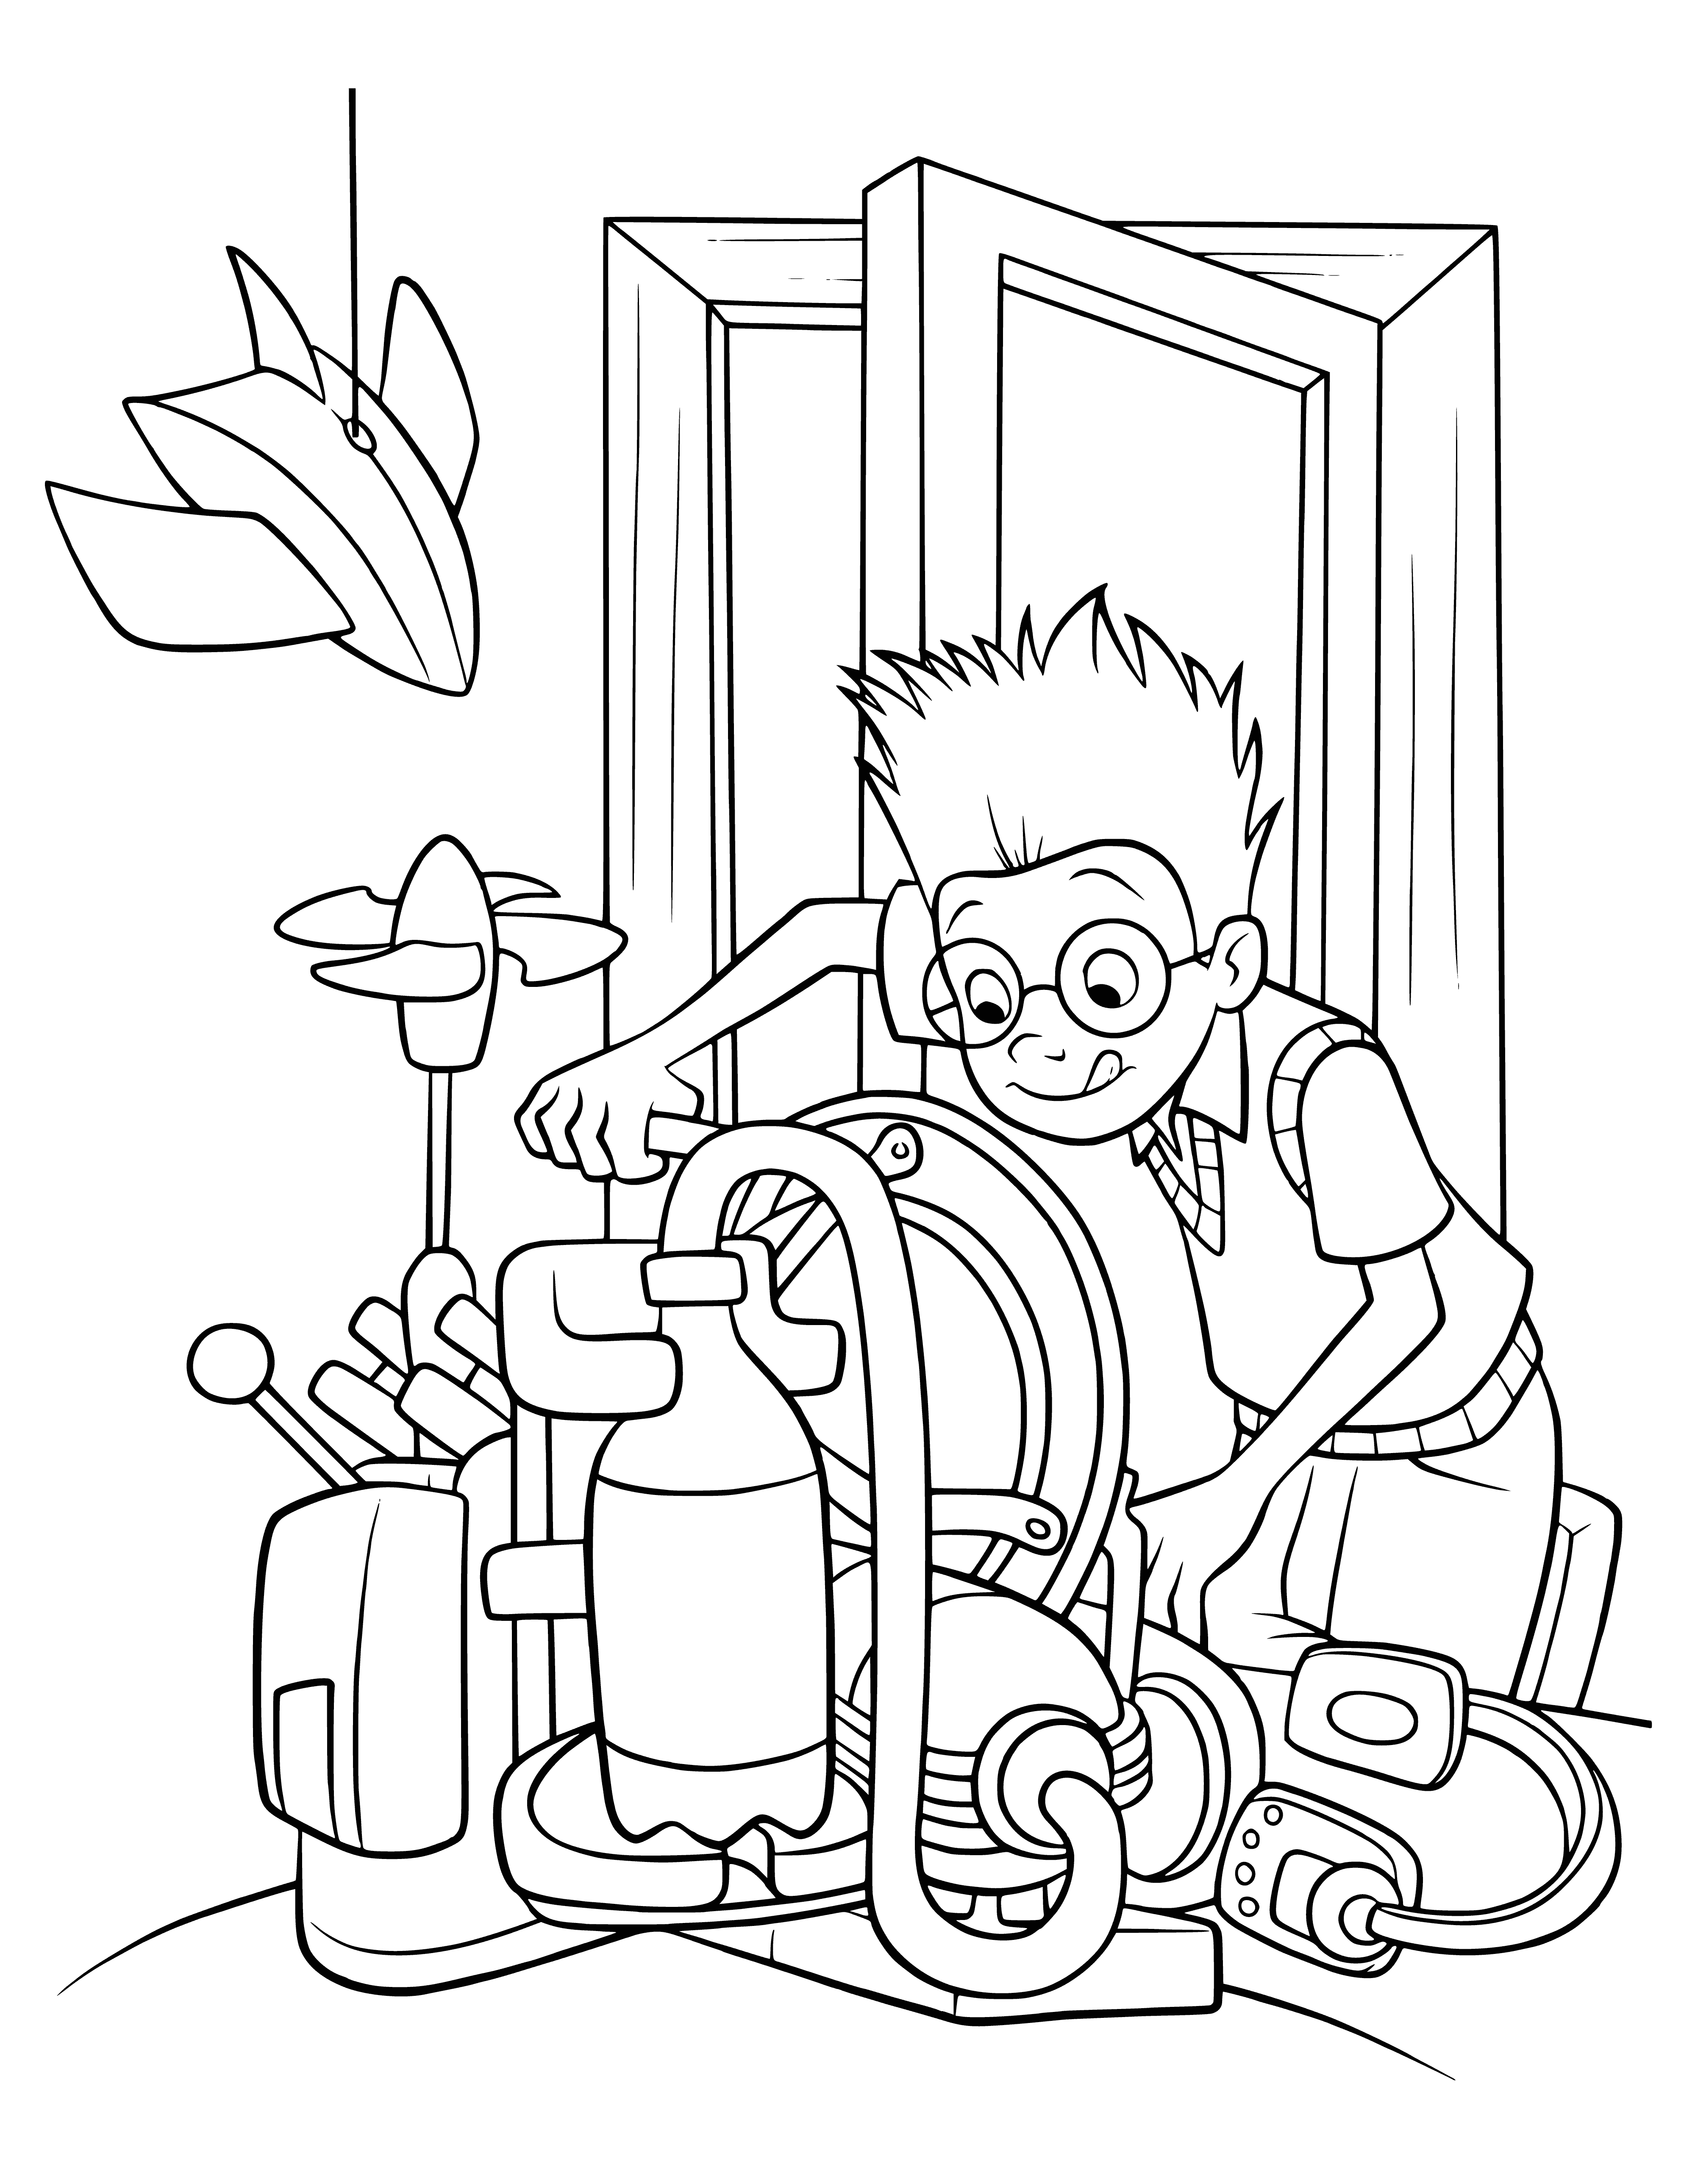 The device is almost ready coloring page